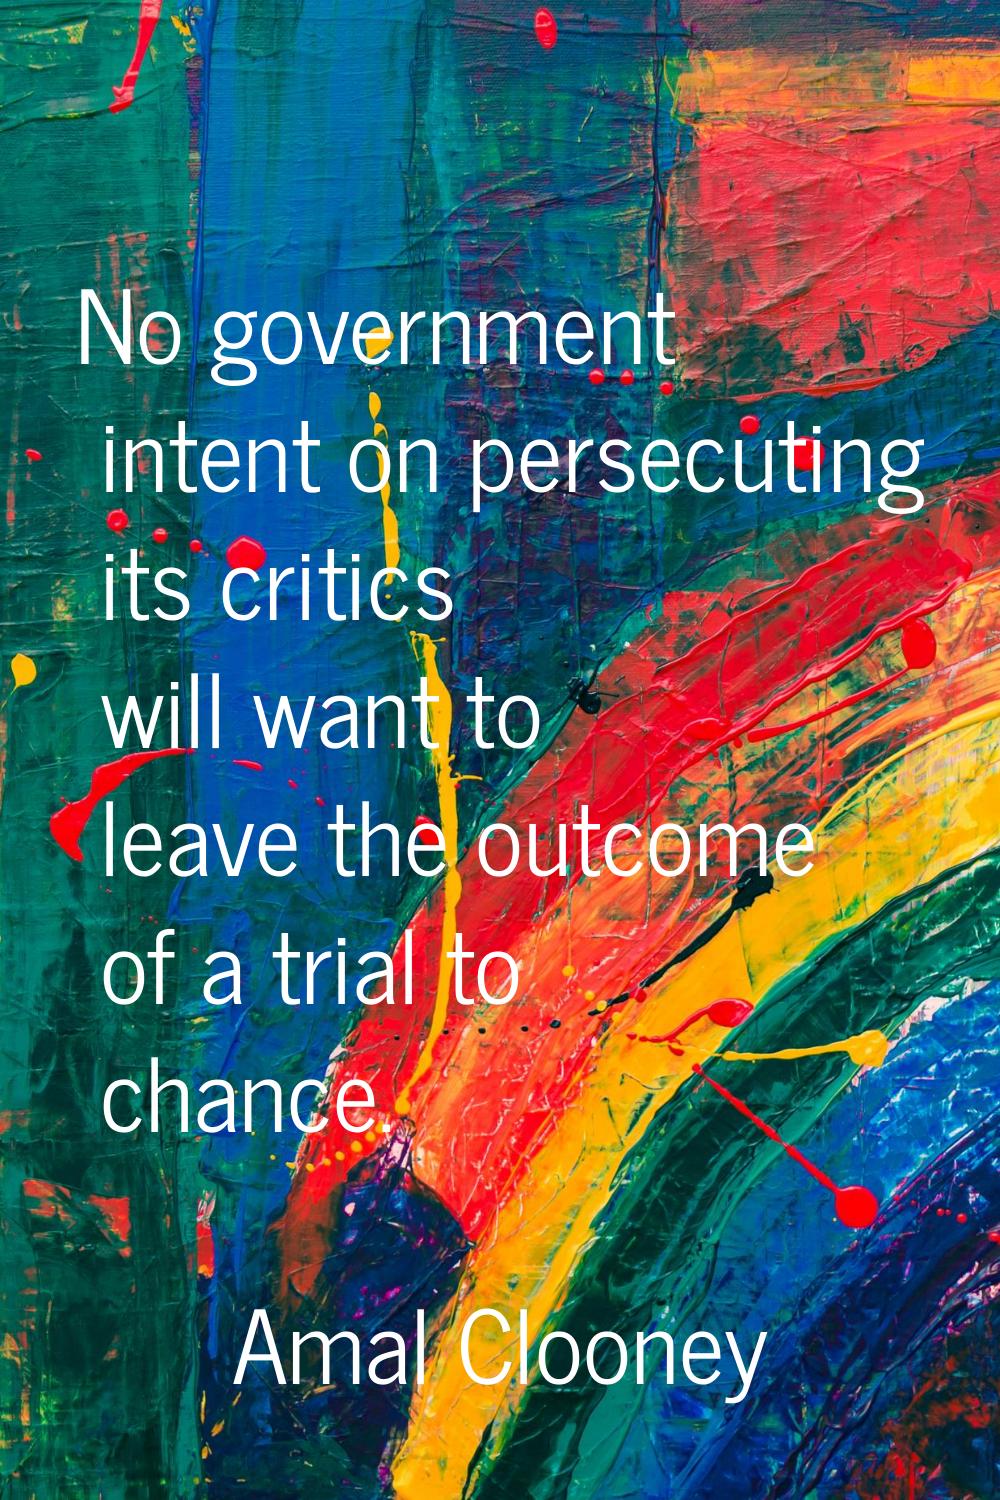 No government intent on persecuting its critics will want to leave the outcome of a trial to chance